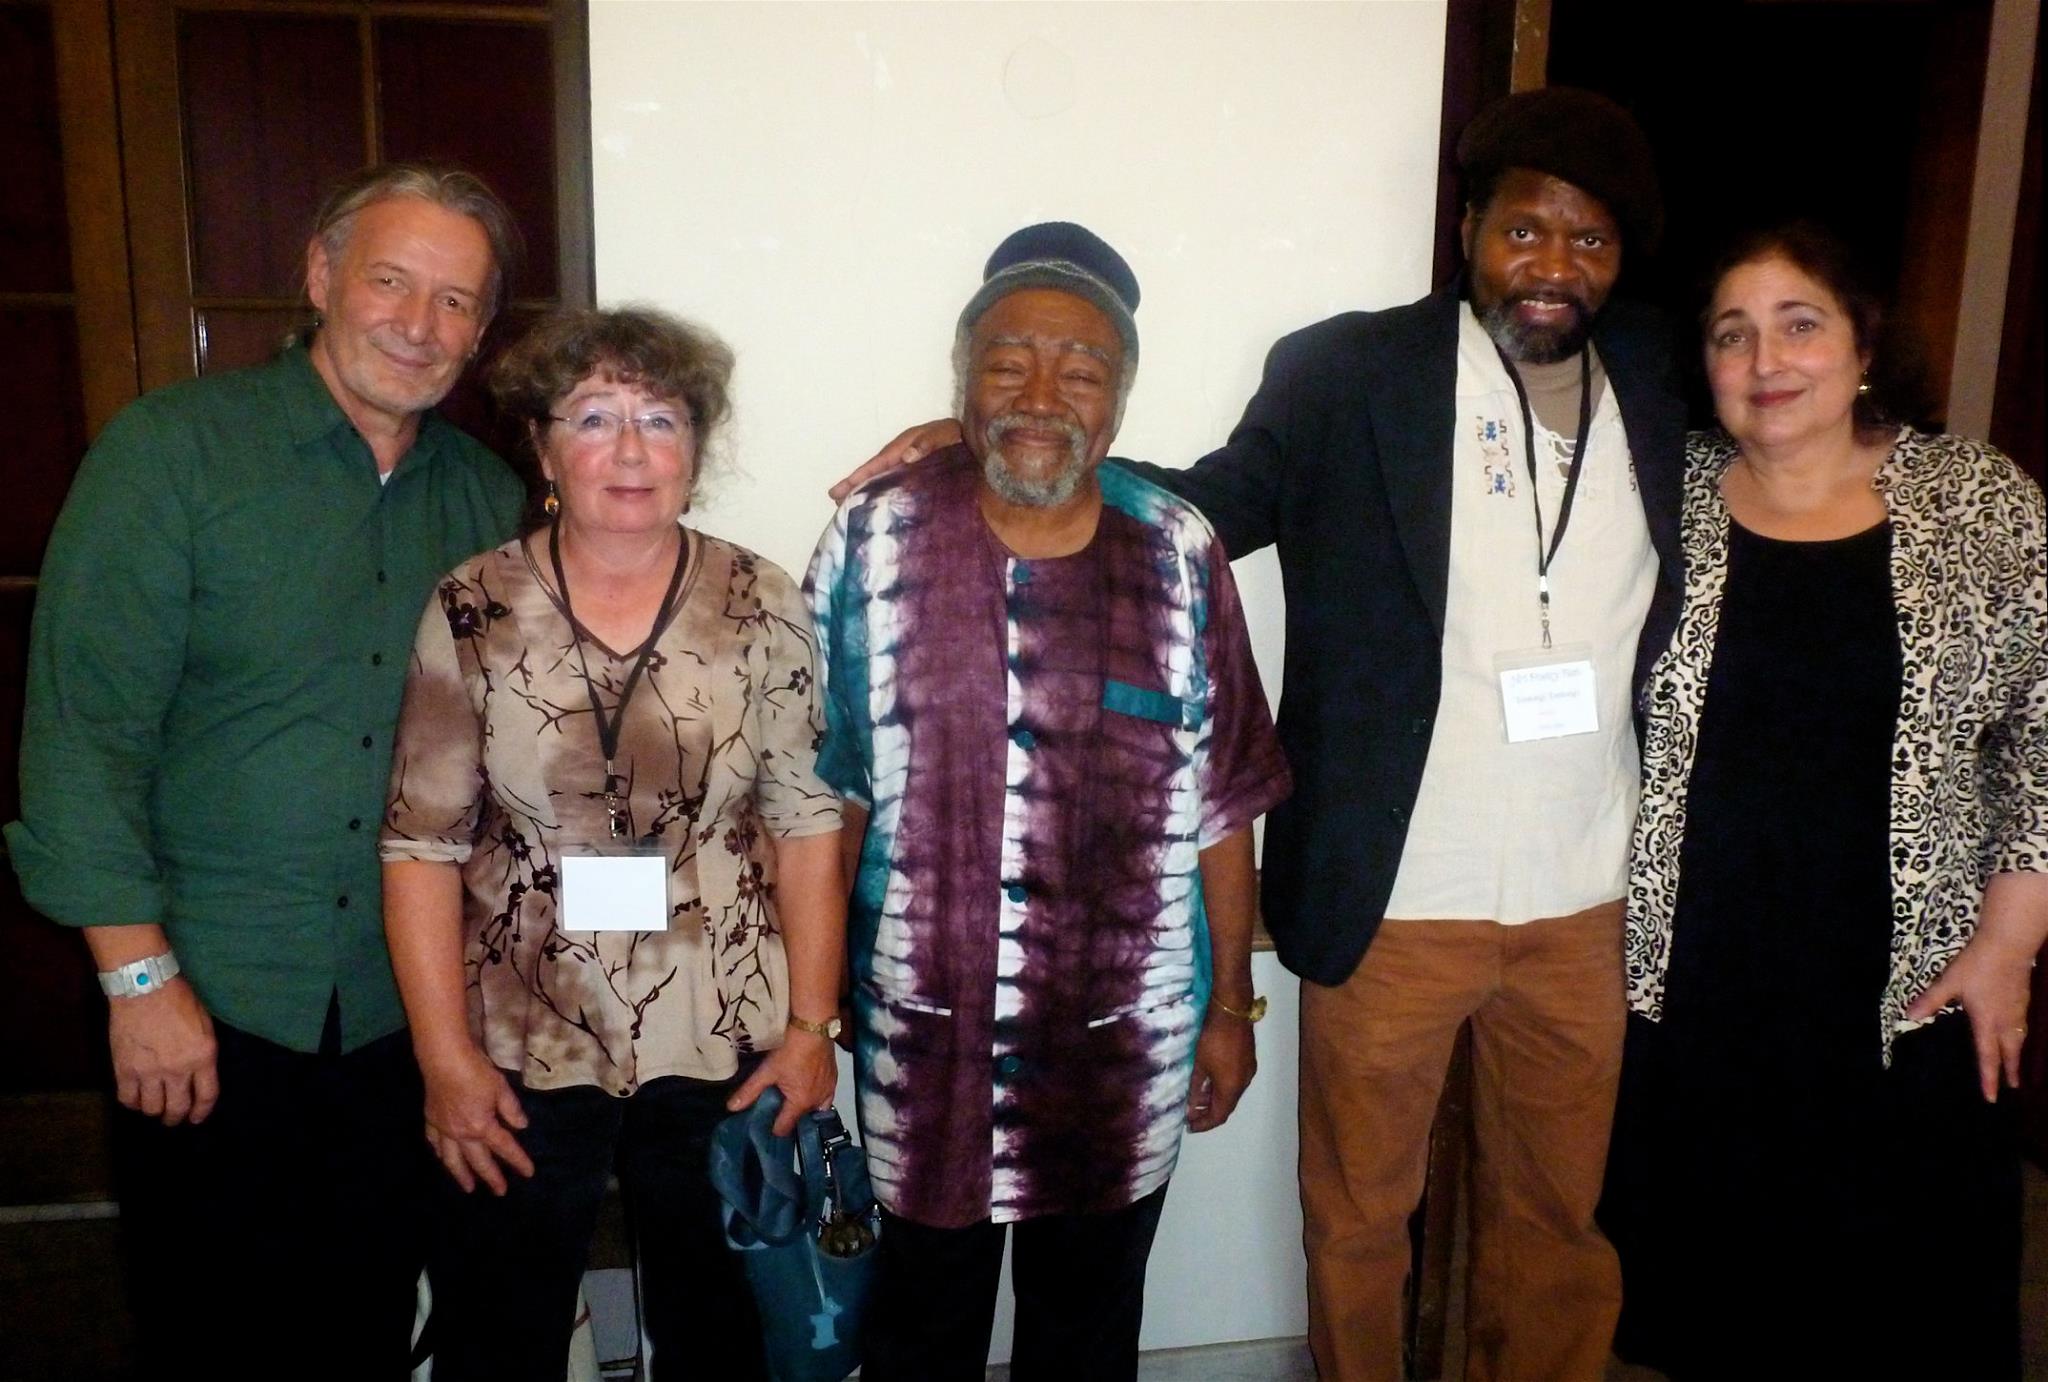 Liberation Poetry Collective poets Richard Cambridge (from the left), Patricia Frisela, Askia Touré, Tontongi and Jill Netchinsky at New Hampshire’s first poetry festival in 2015.